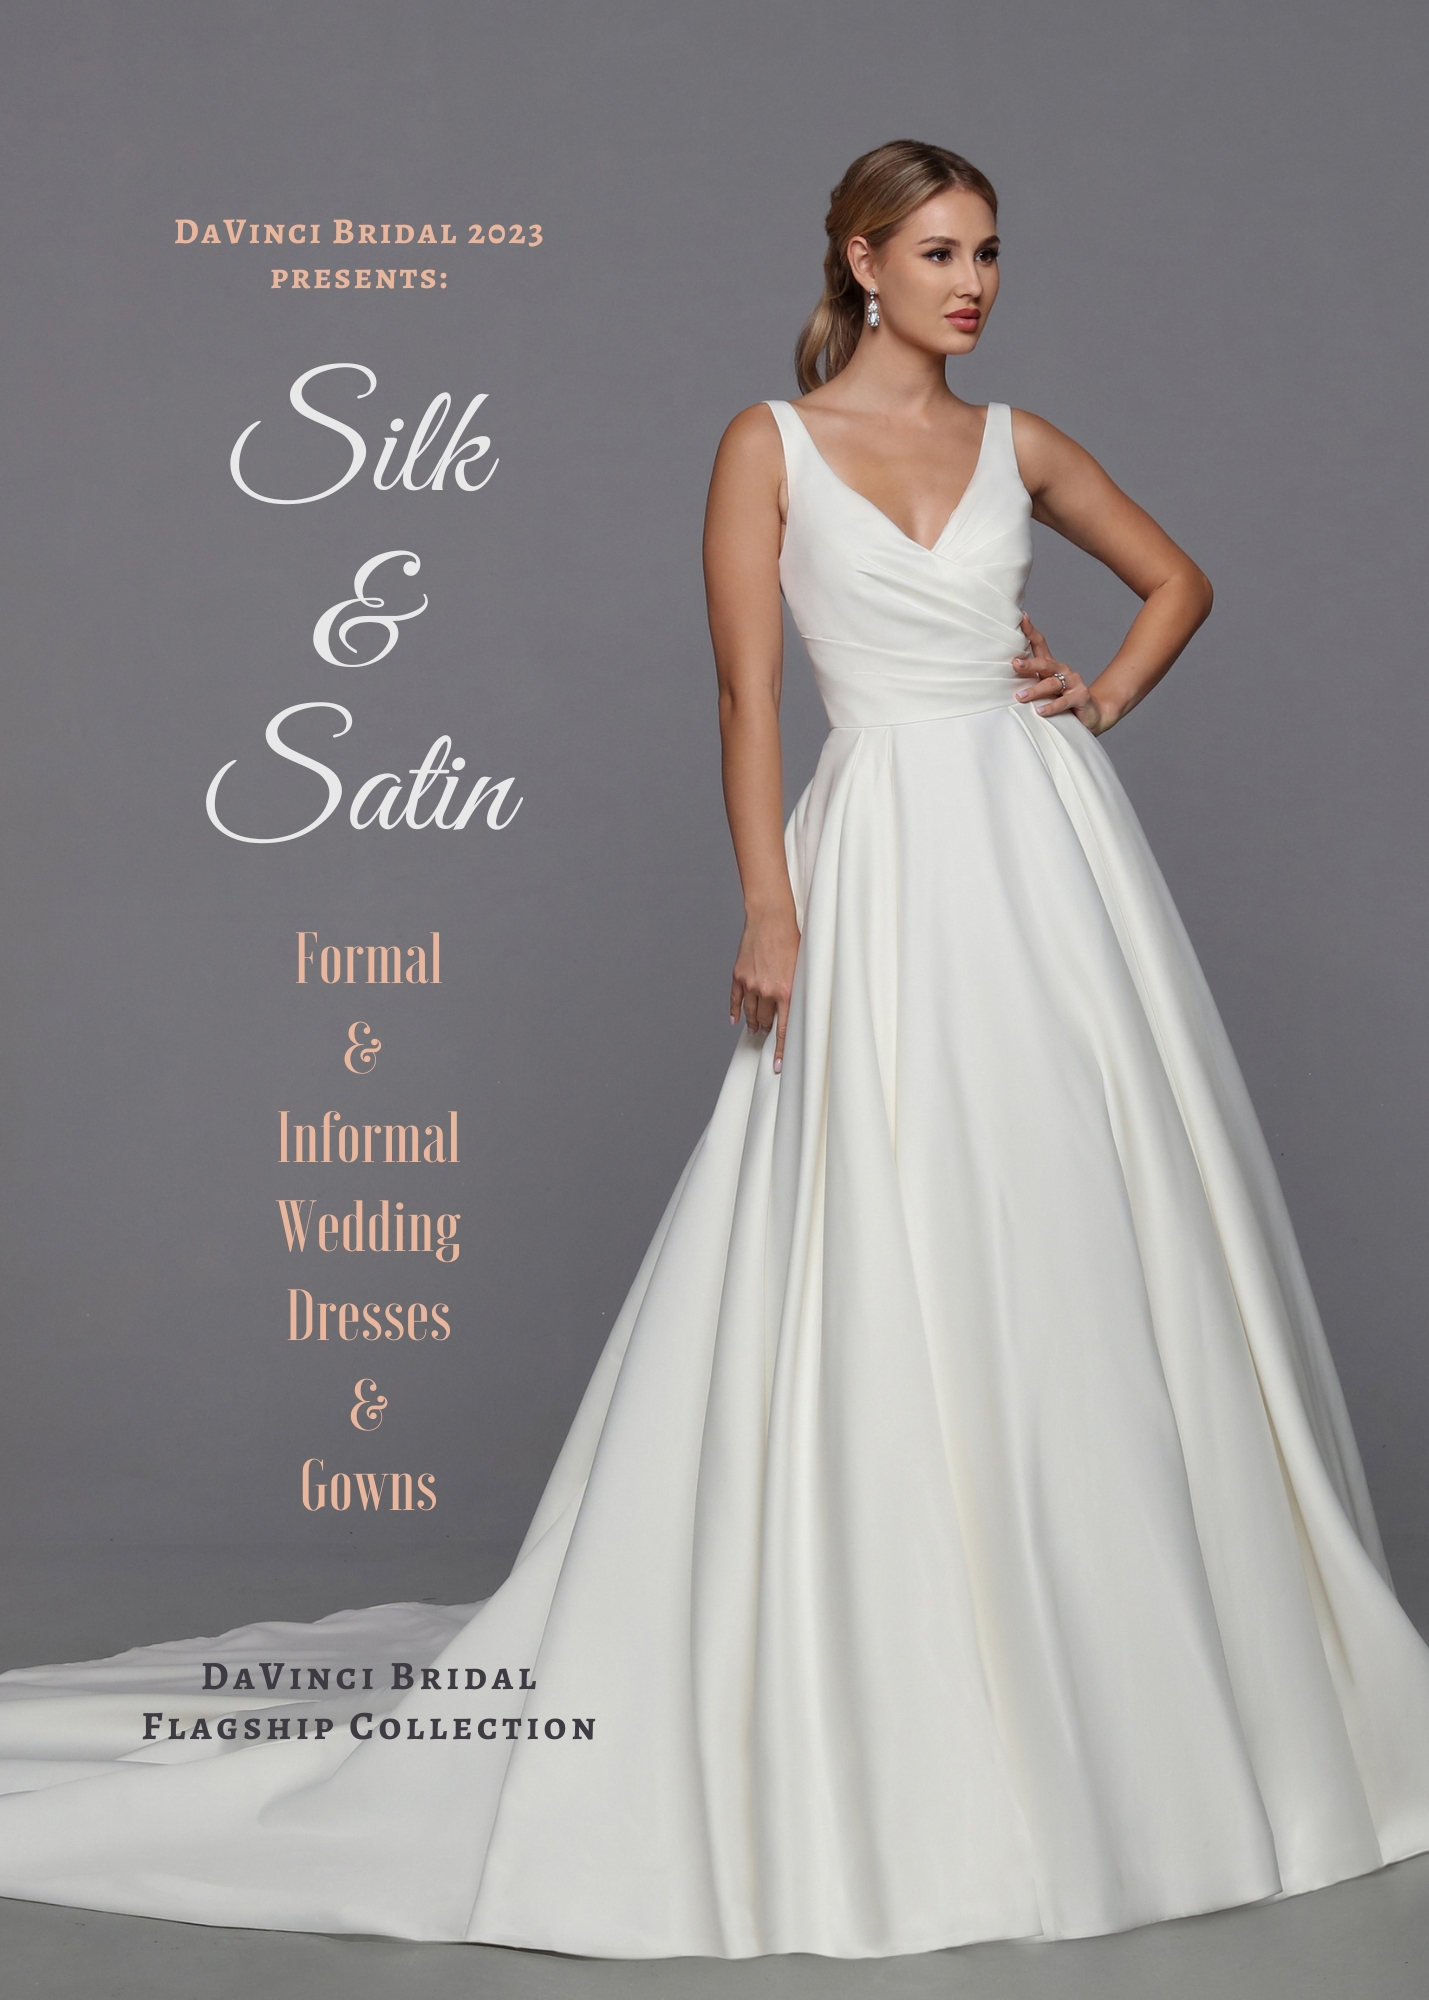 Silk Wedding Dresses For Elegant and Refined Bride | Plain wedding dress, Wedding  dresses simple, Simple wedding gowns